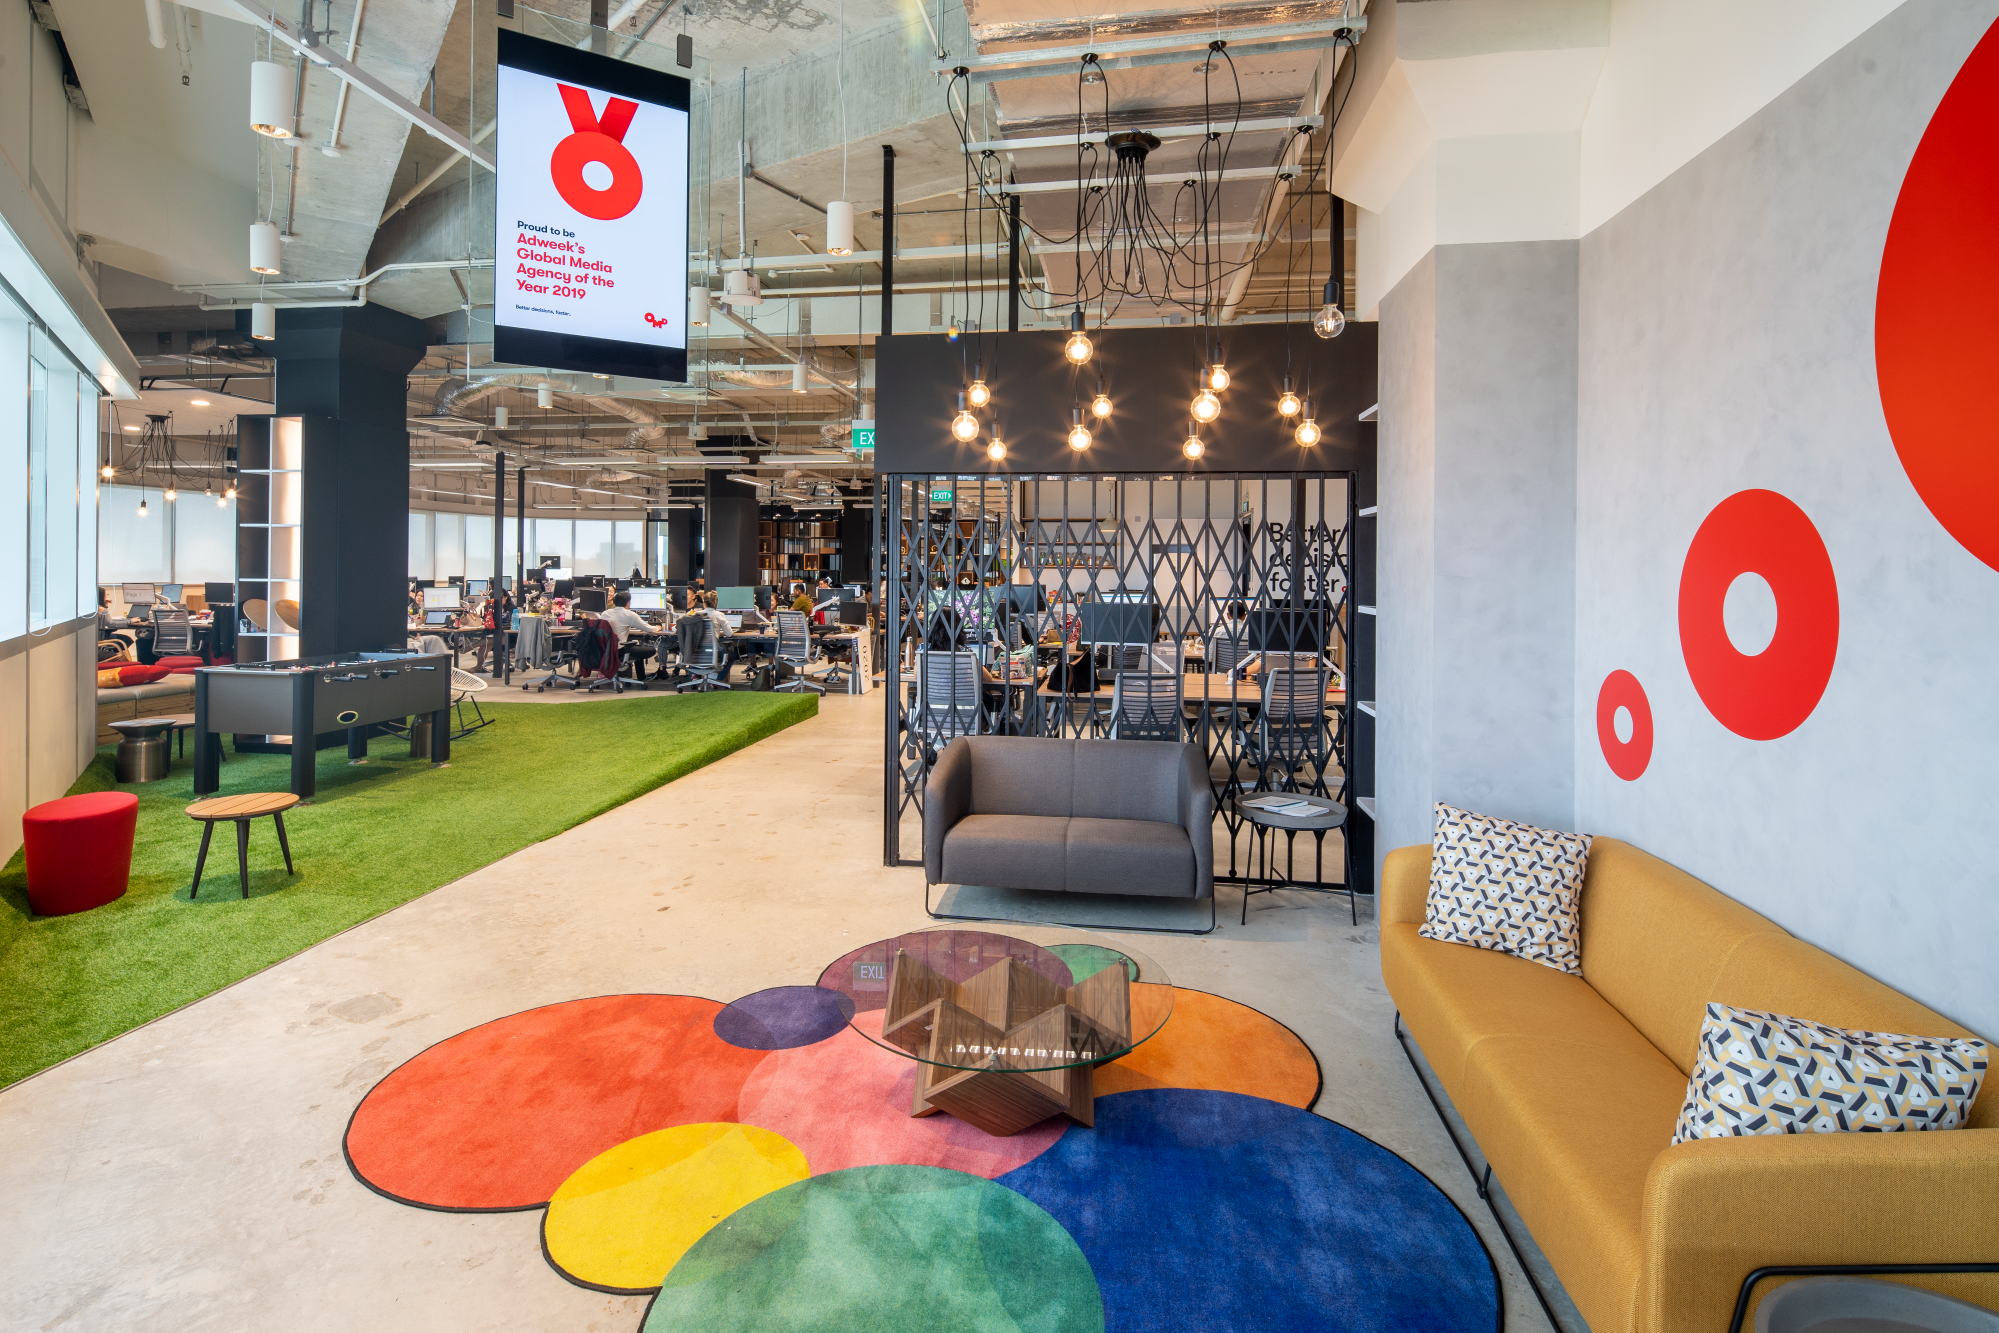 Workplace Design Trends - Lasting Design Trends & Their Impact On The Workplace